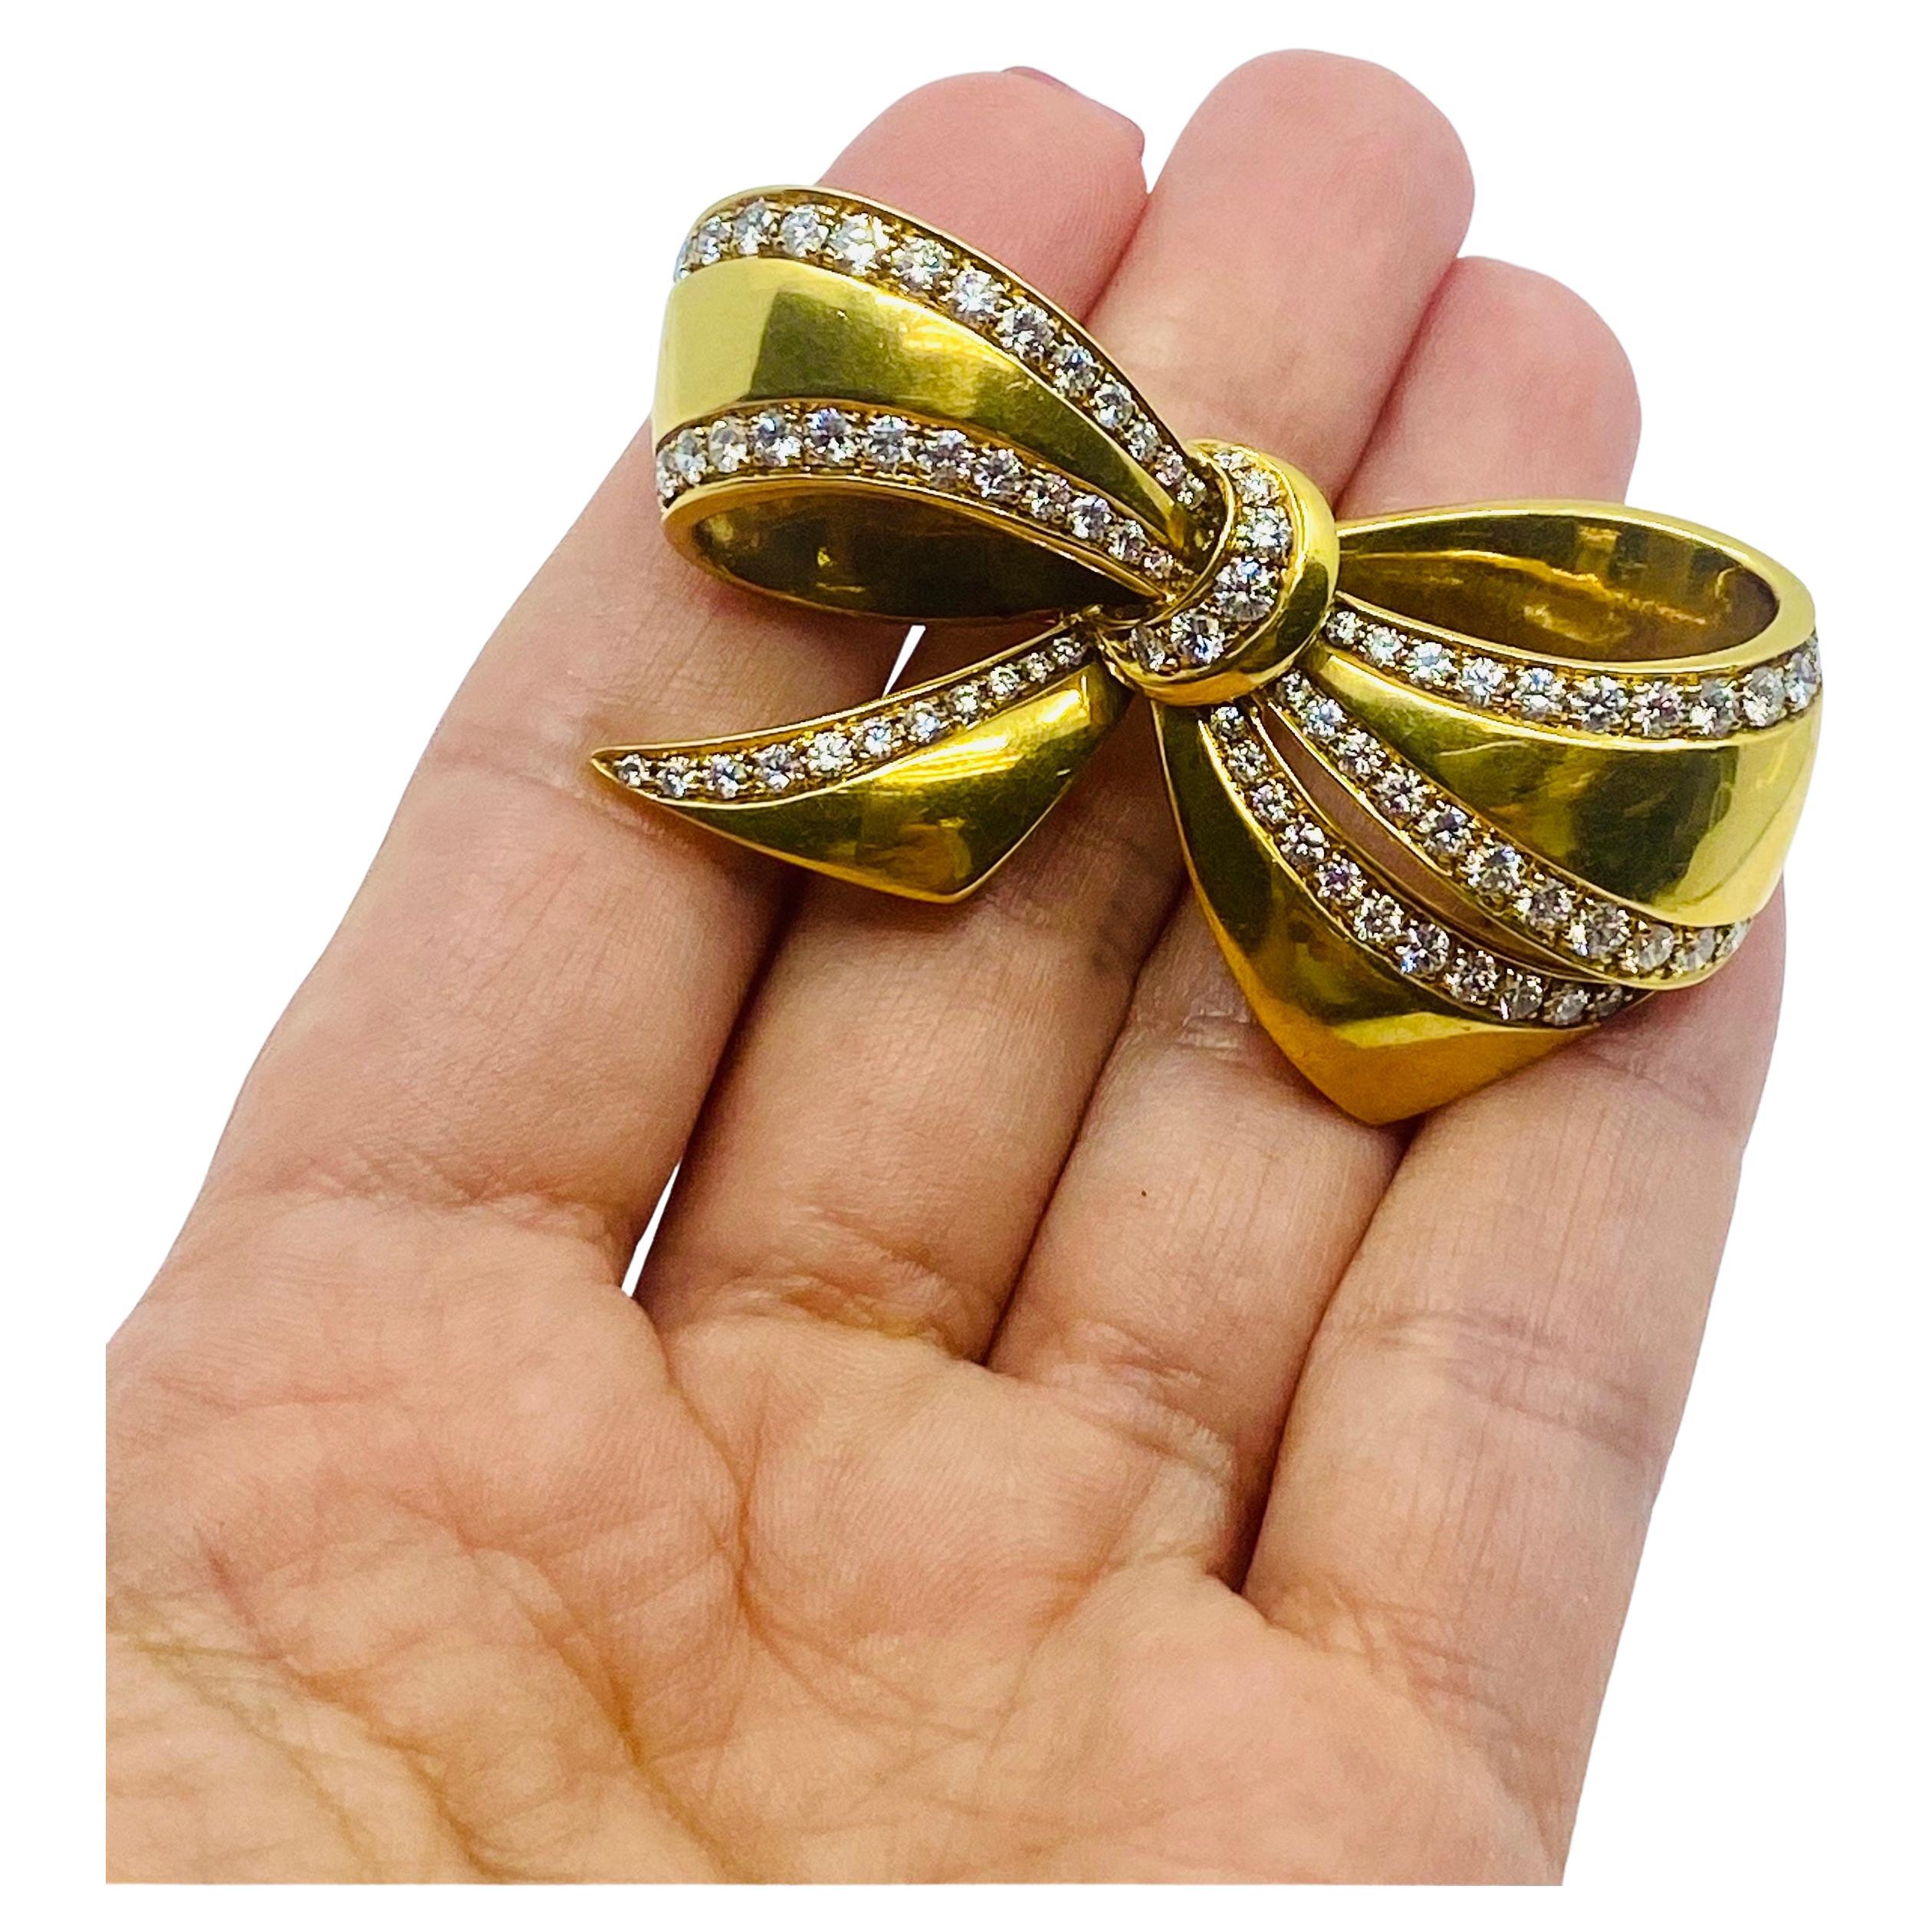 An elegant 18k gold diamond bow brooch by Black, Starr & Frost. This classic piece was crafted with a focus on balanced proportions, which resulted in the brooch’s graceful lines and chic appearance. The bow is made of polished gold, with the edges